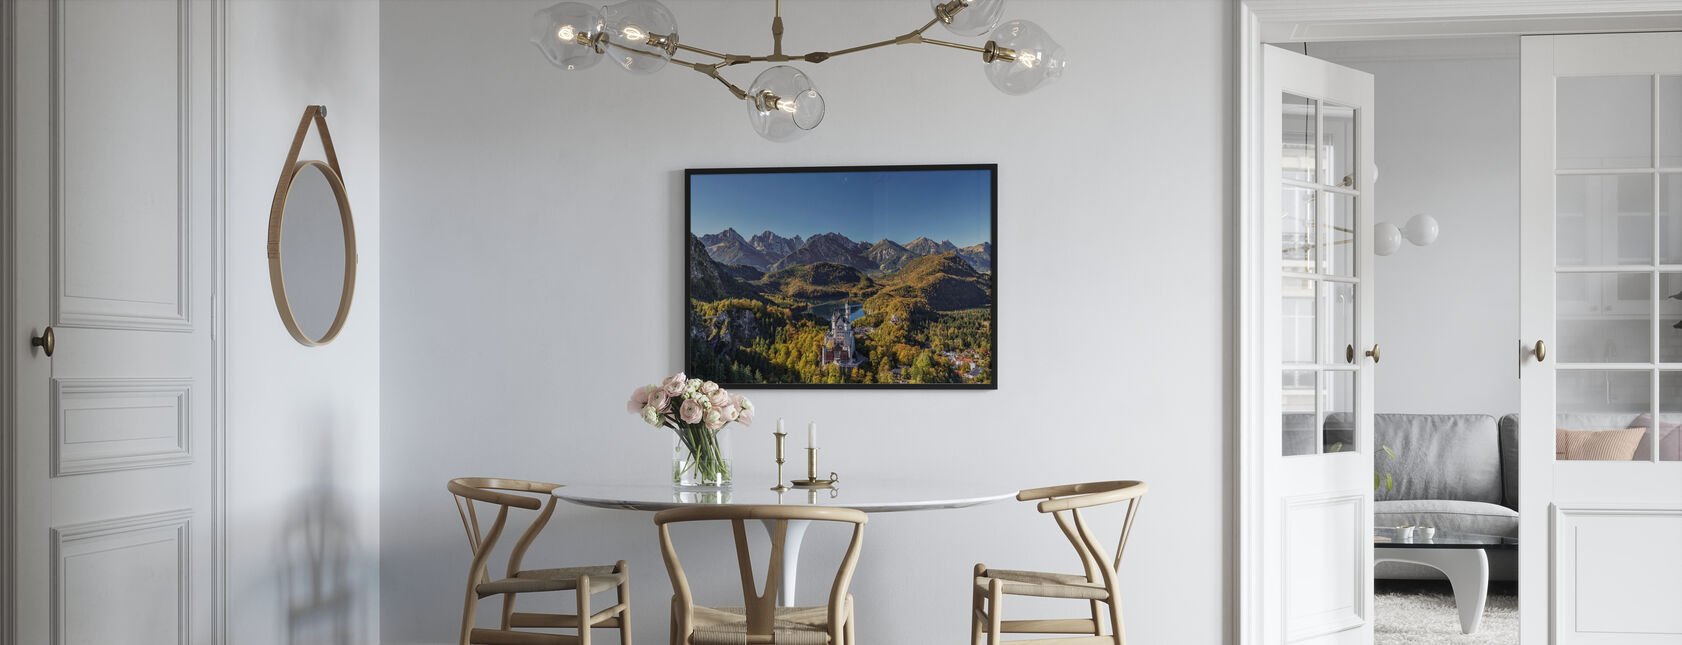 Castle in the Mountains - Poster - Kitchen